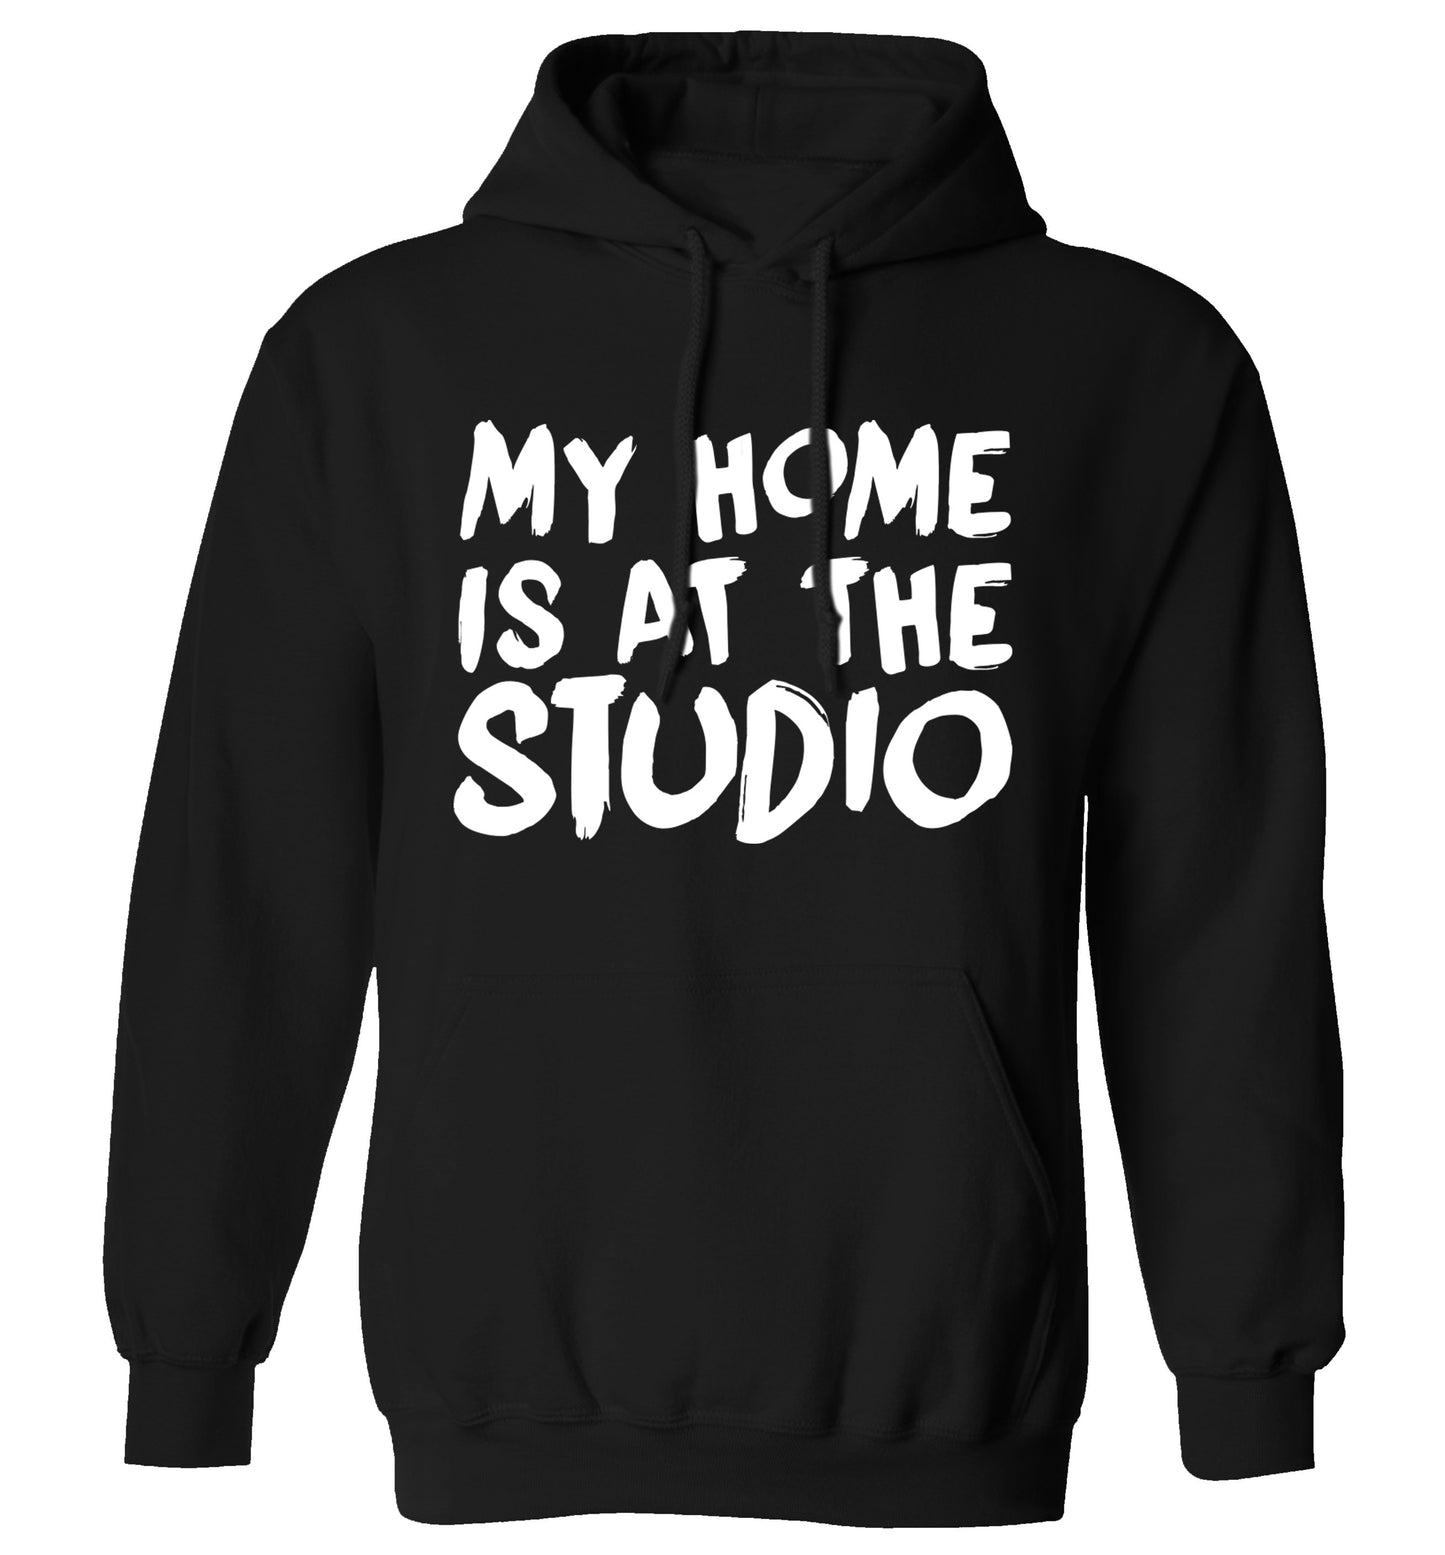 My home is at the studio adults unisex black hoodie 2XL